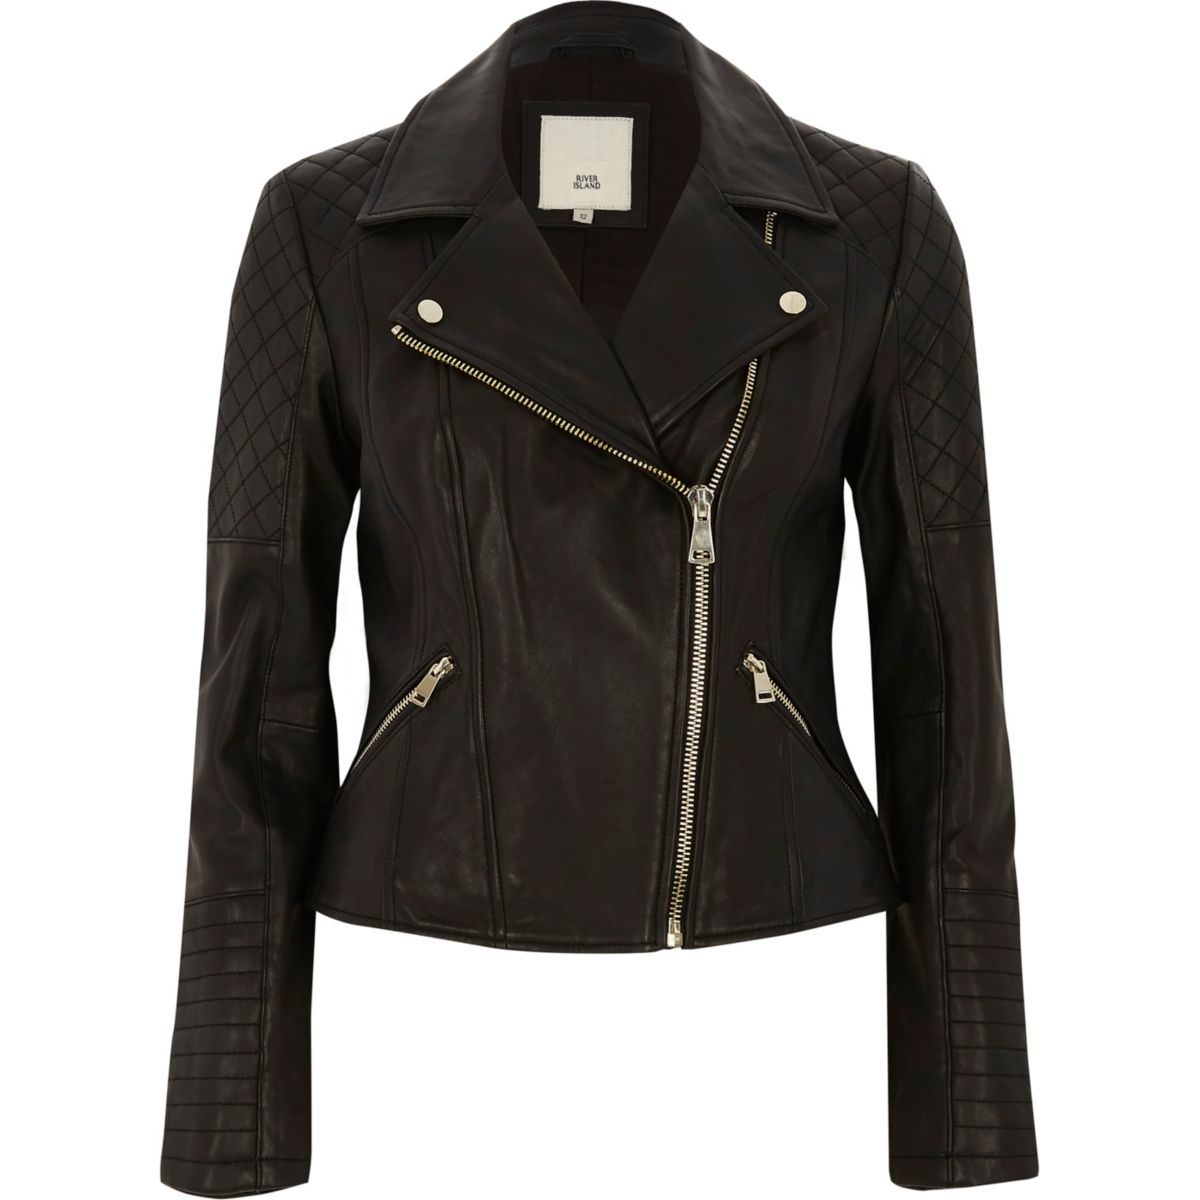 Affordable Leather Jackets - River Island Leather Jacket